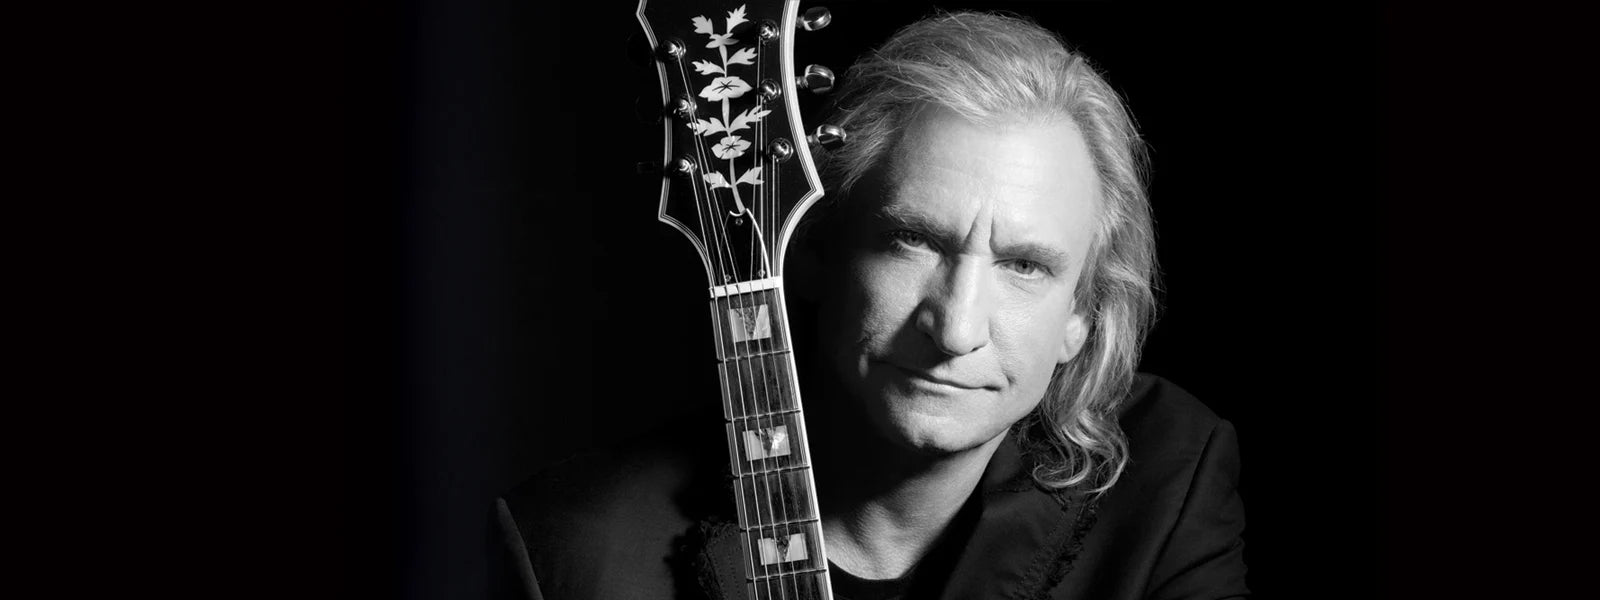 Black and white photo of Joe Walsh posing with guitar